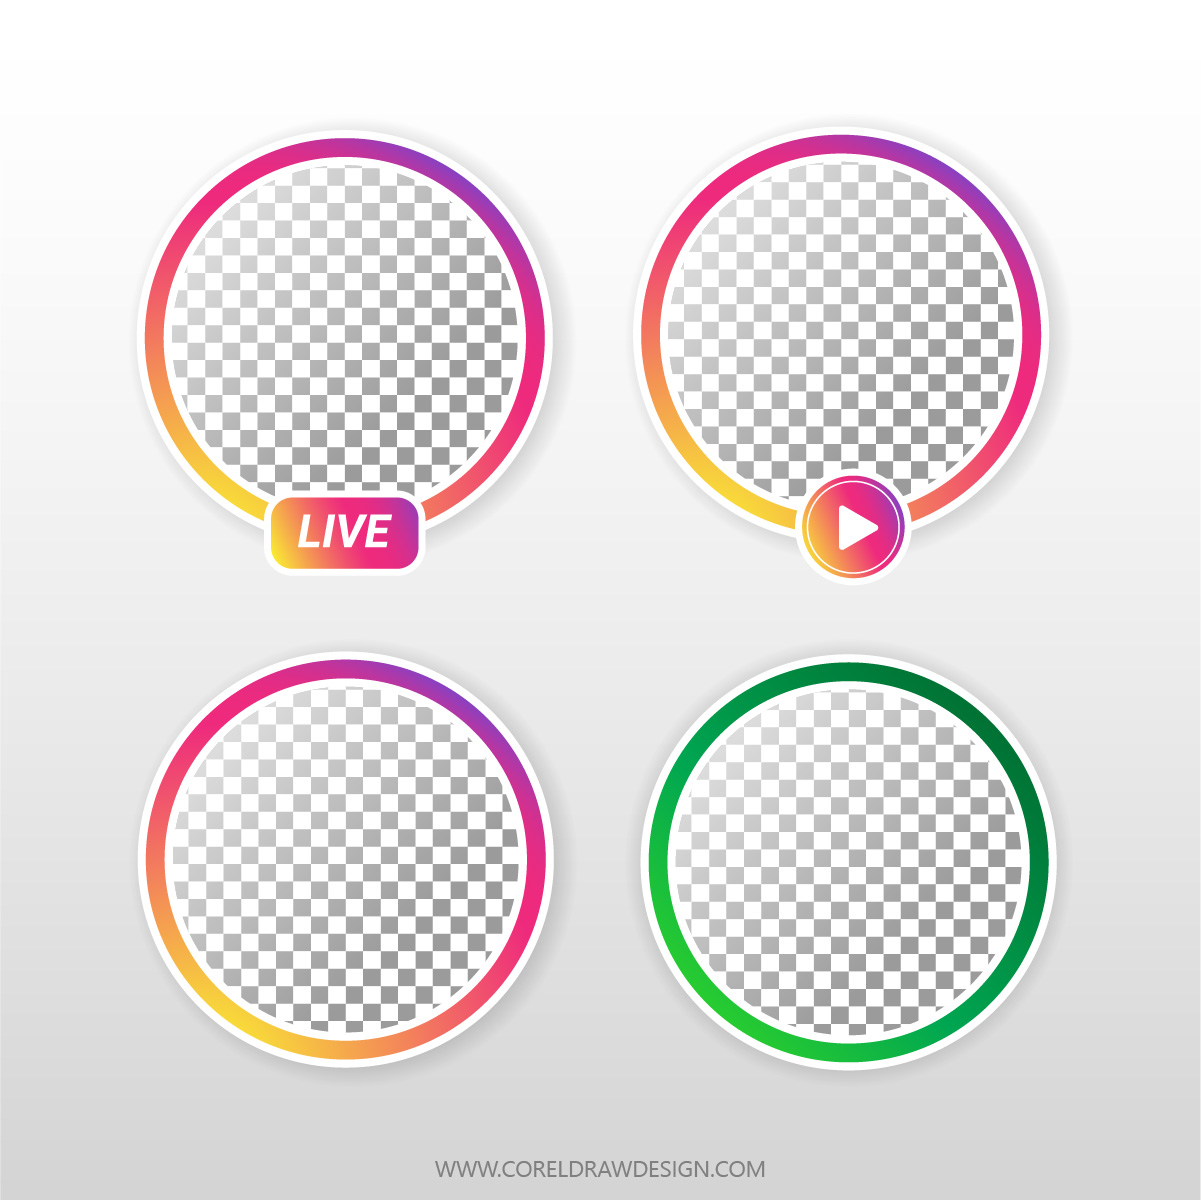 Download Instagram Profile Story, Live and Close Friend Story Circle  Profile Frame  CorelDraw Design (Download Free CDR, Vector, Stock Images,  Tutorials, Tips & Tricks)